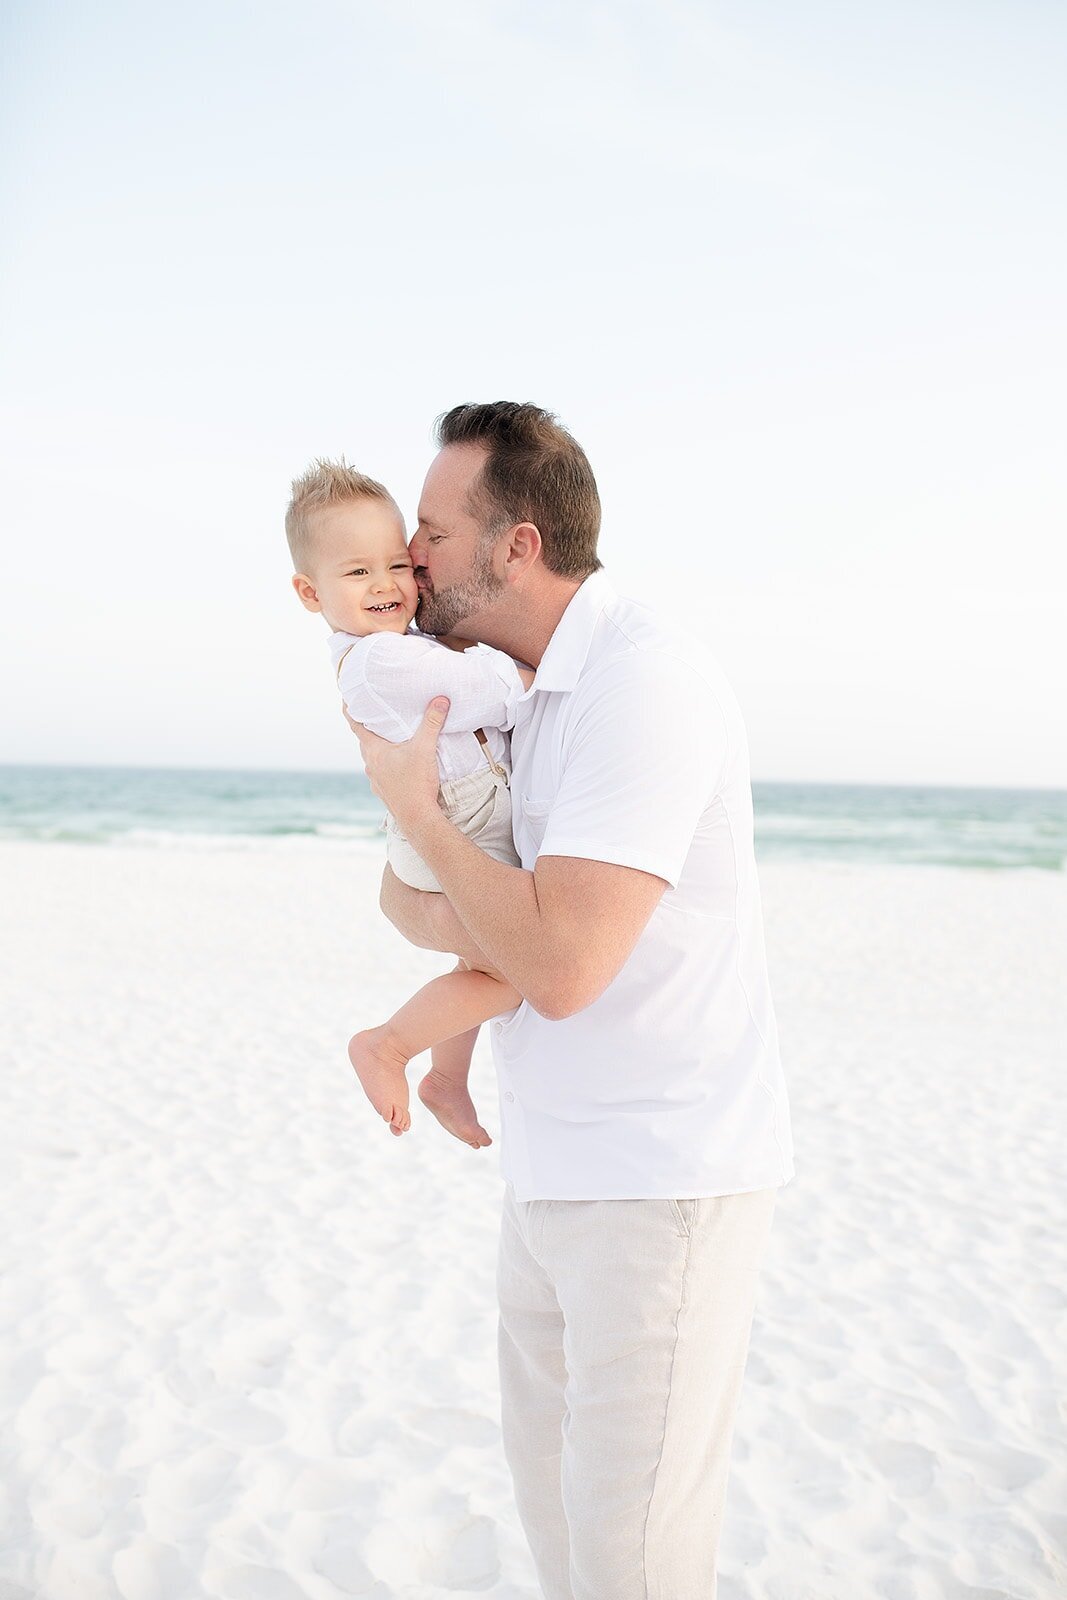 father kissing his toddler on the cheek at the beach